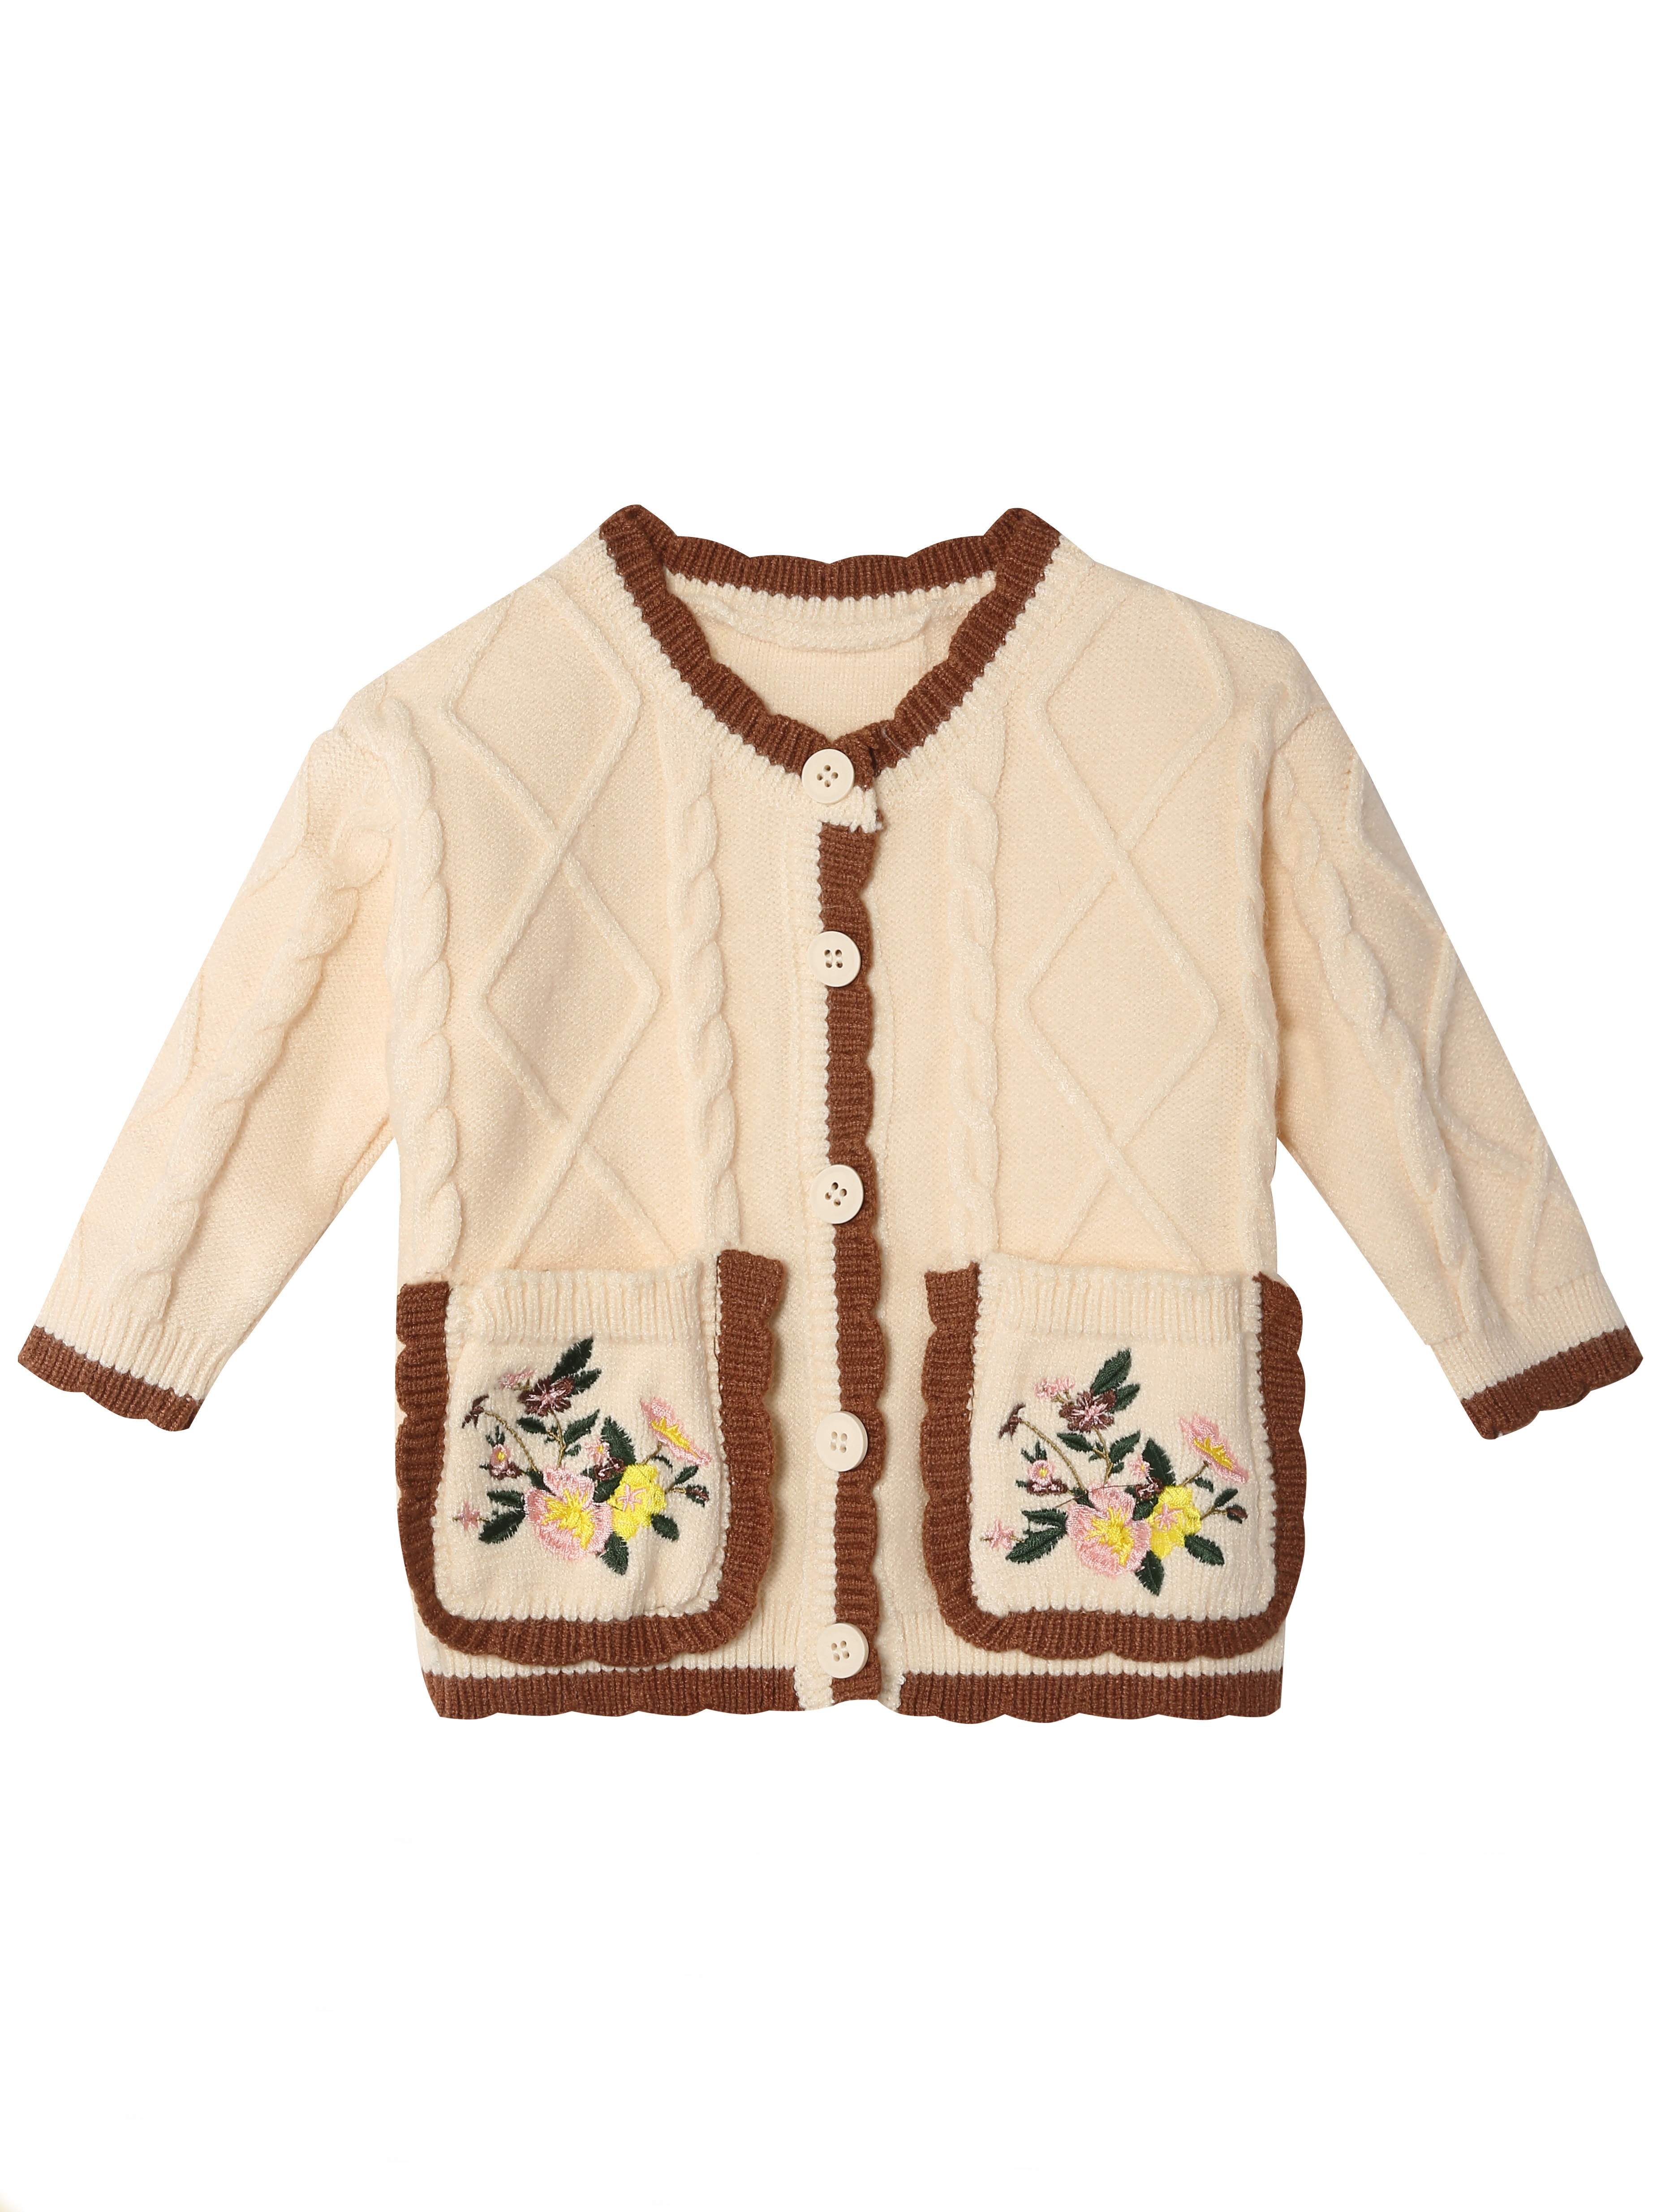 Lady Girl Knitted Sweater Cardigan Coat Top Embroidery Floral Casual Winter  Cute